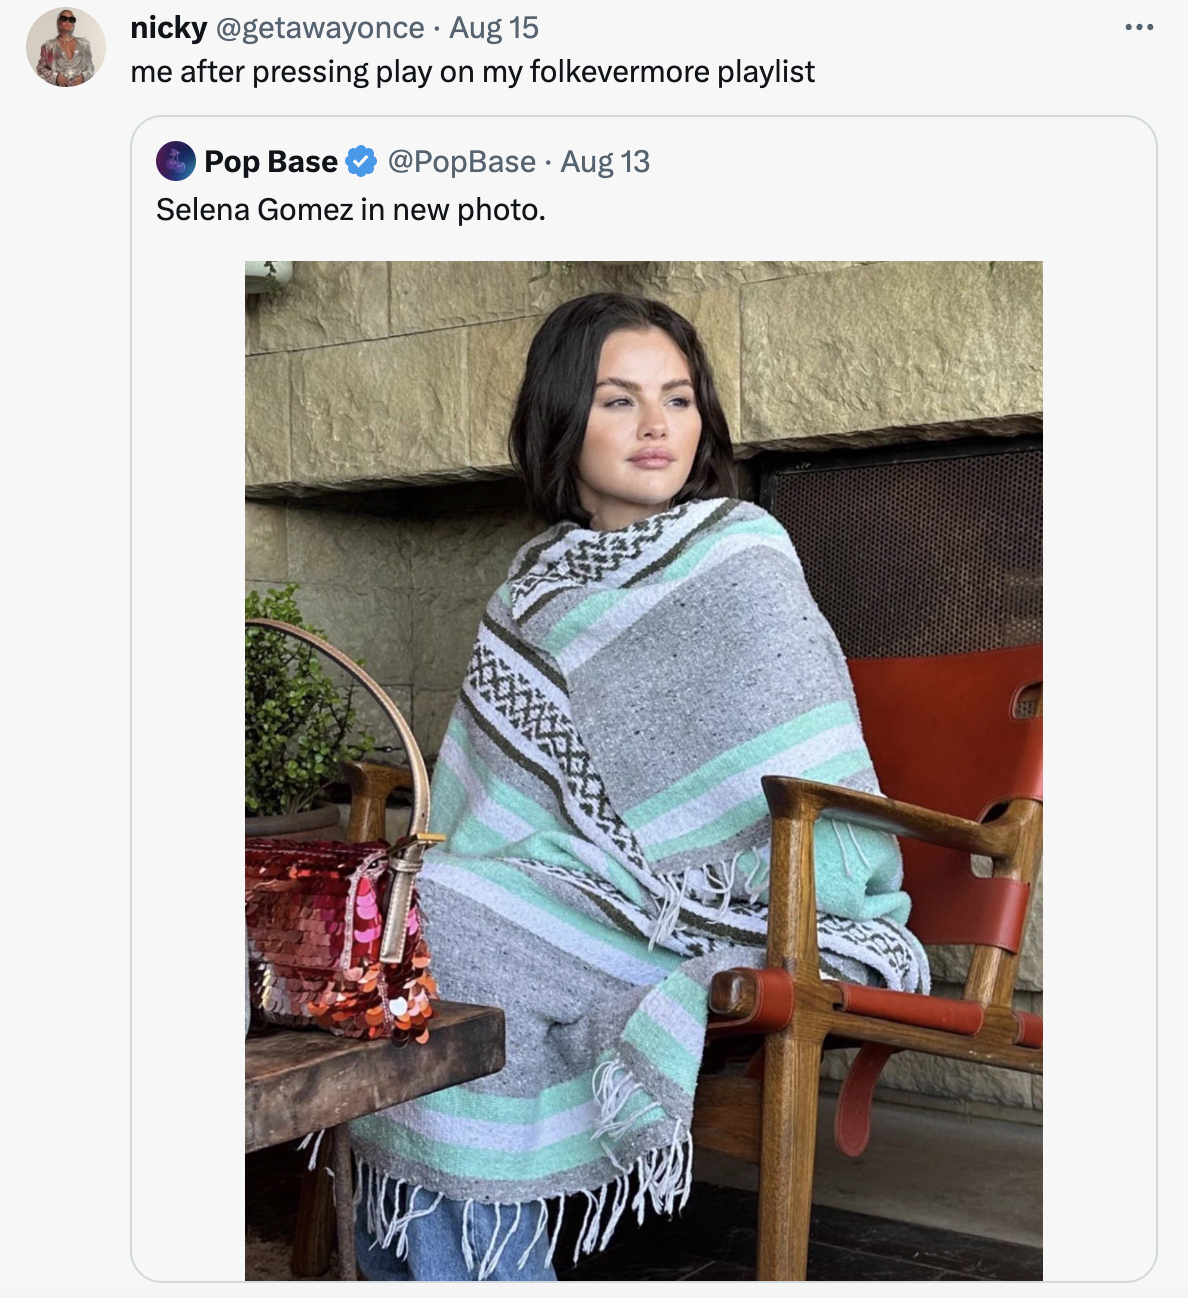 selena gomez in a blanket - stole - nicky Aug 15 me after pressing play on my folkevermore playlist Pop Base Aug 13 Selena Gomez in new photo. Zdra